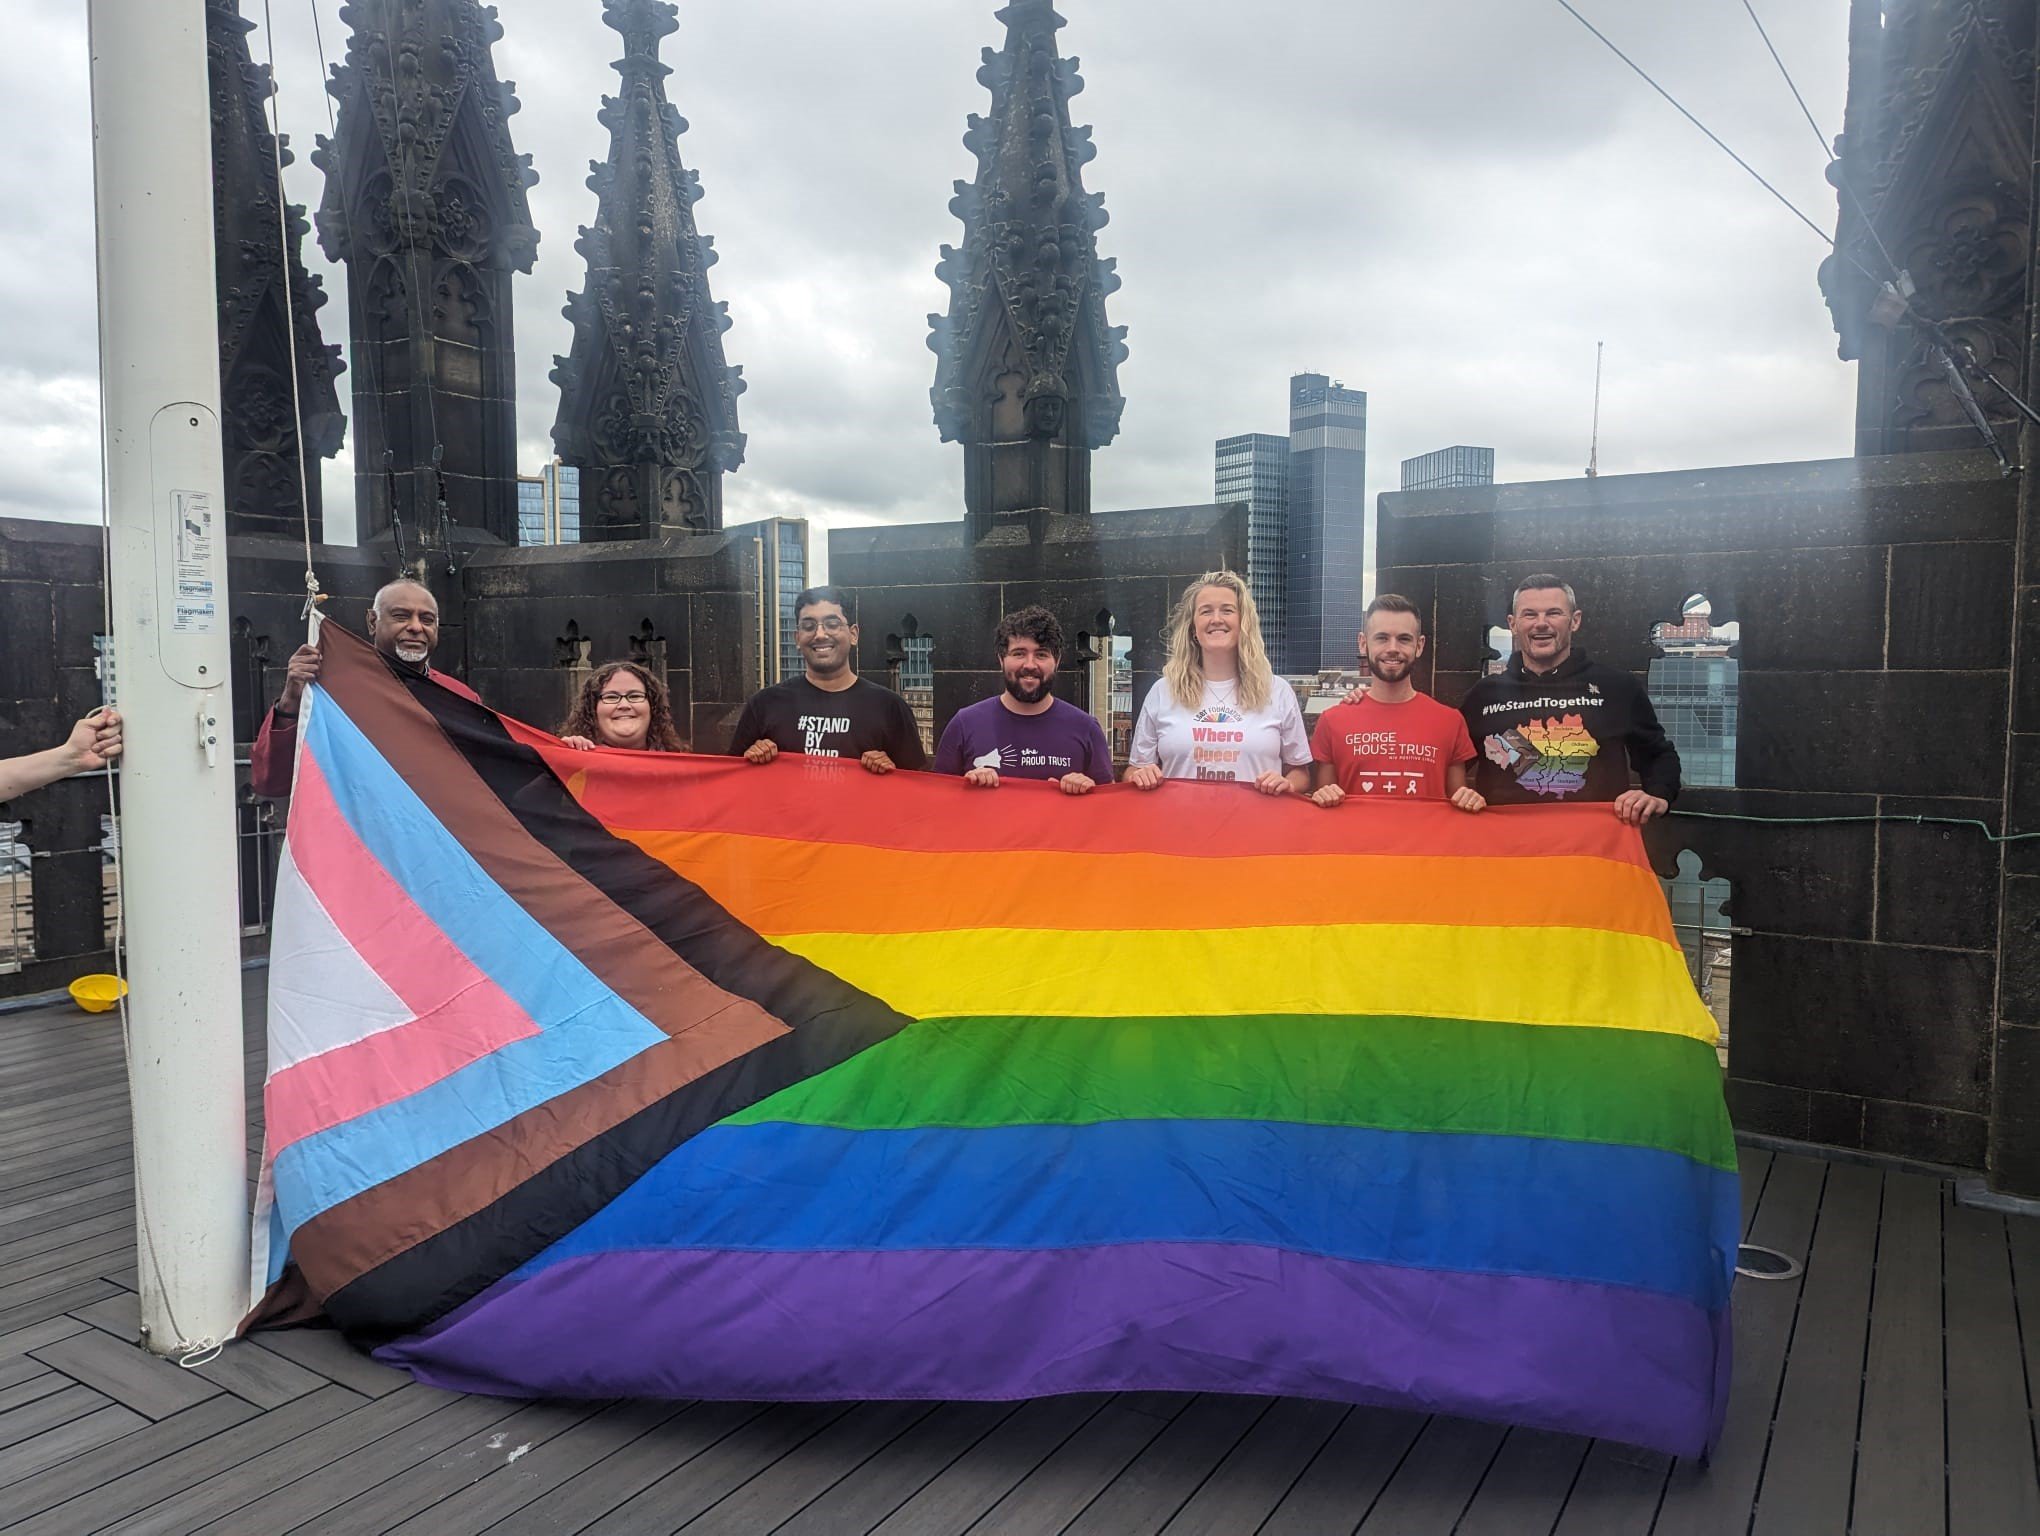  Team members at Manchester Cathedral standing on the roof of the church holding the Pride Progress flag, preparing to fly it during Pride weekend last month. 